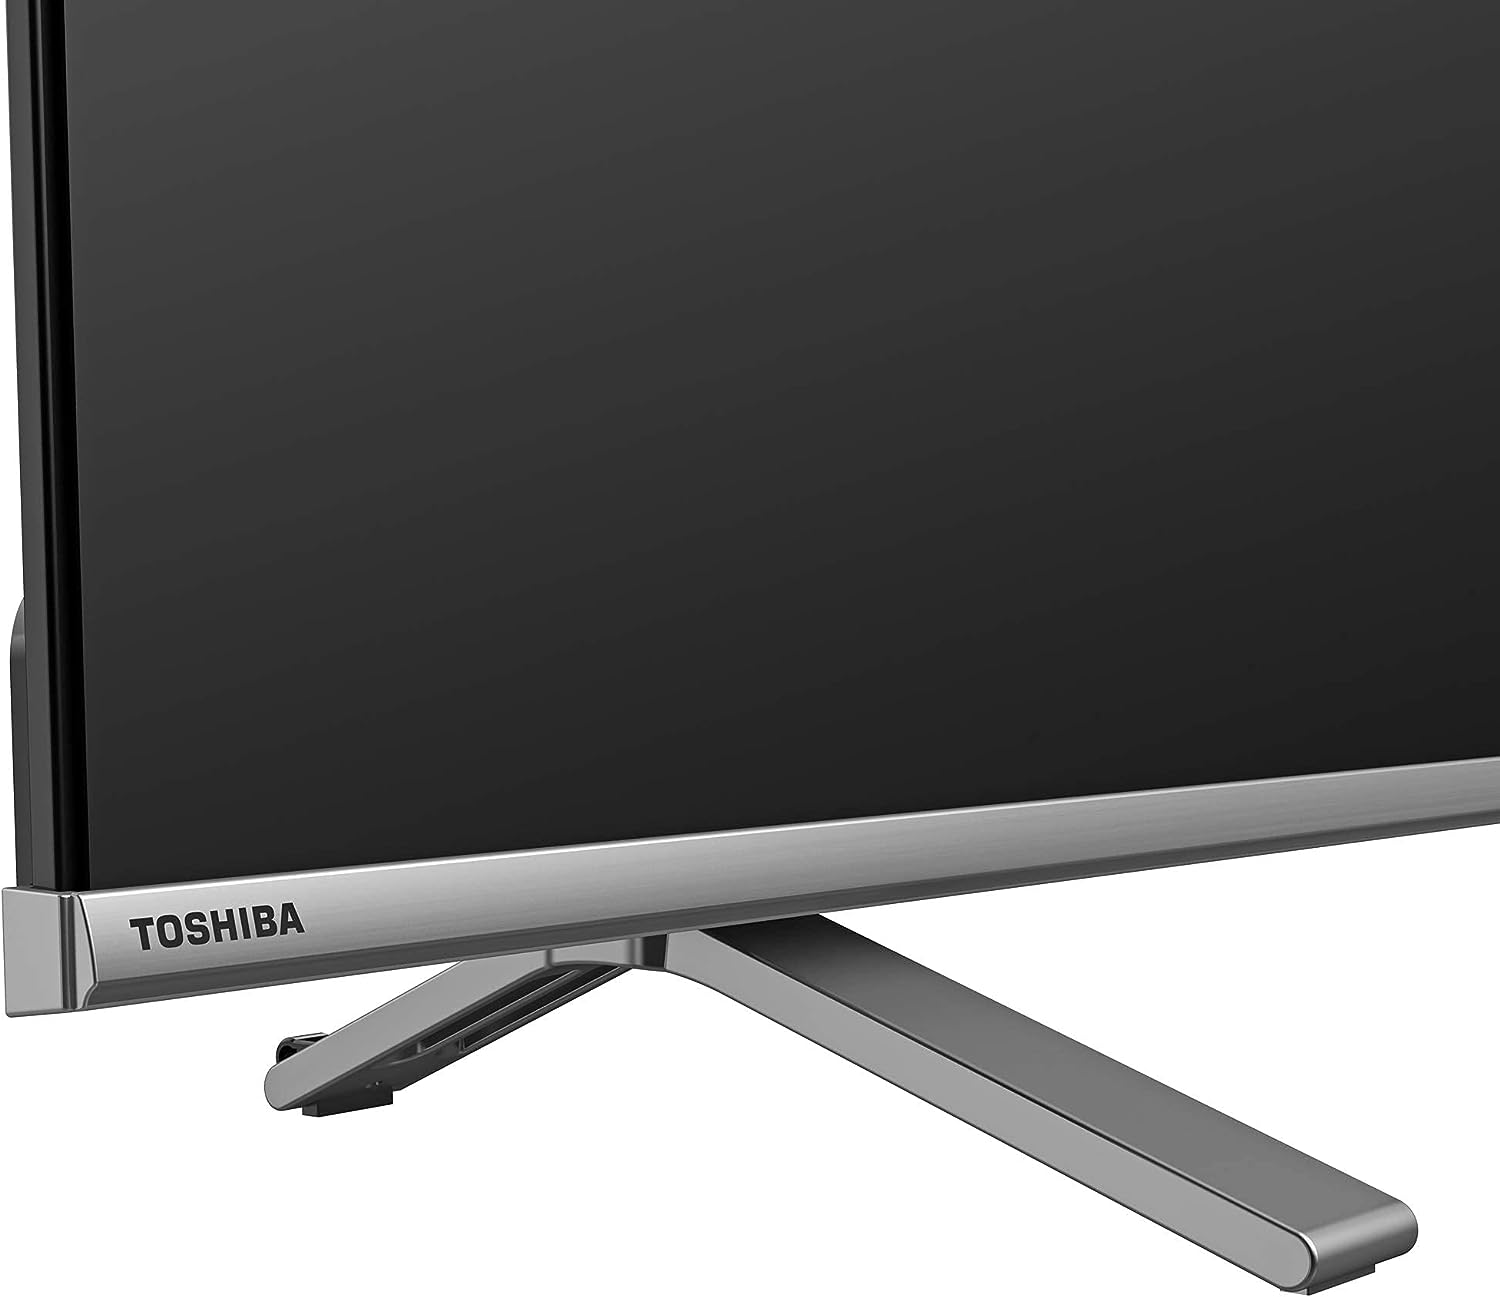 Toshiba 75-inch TV review